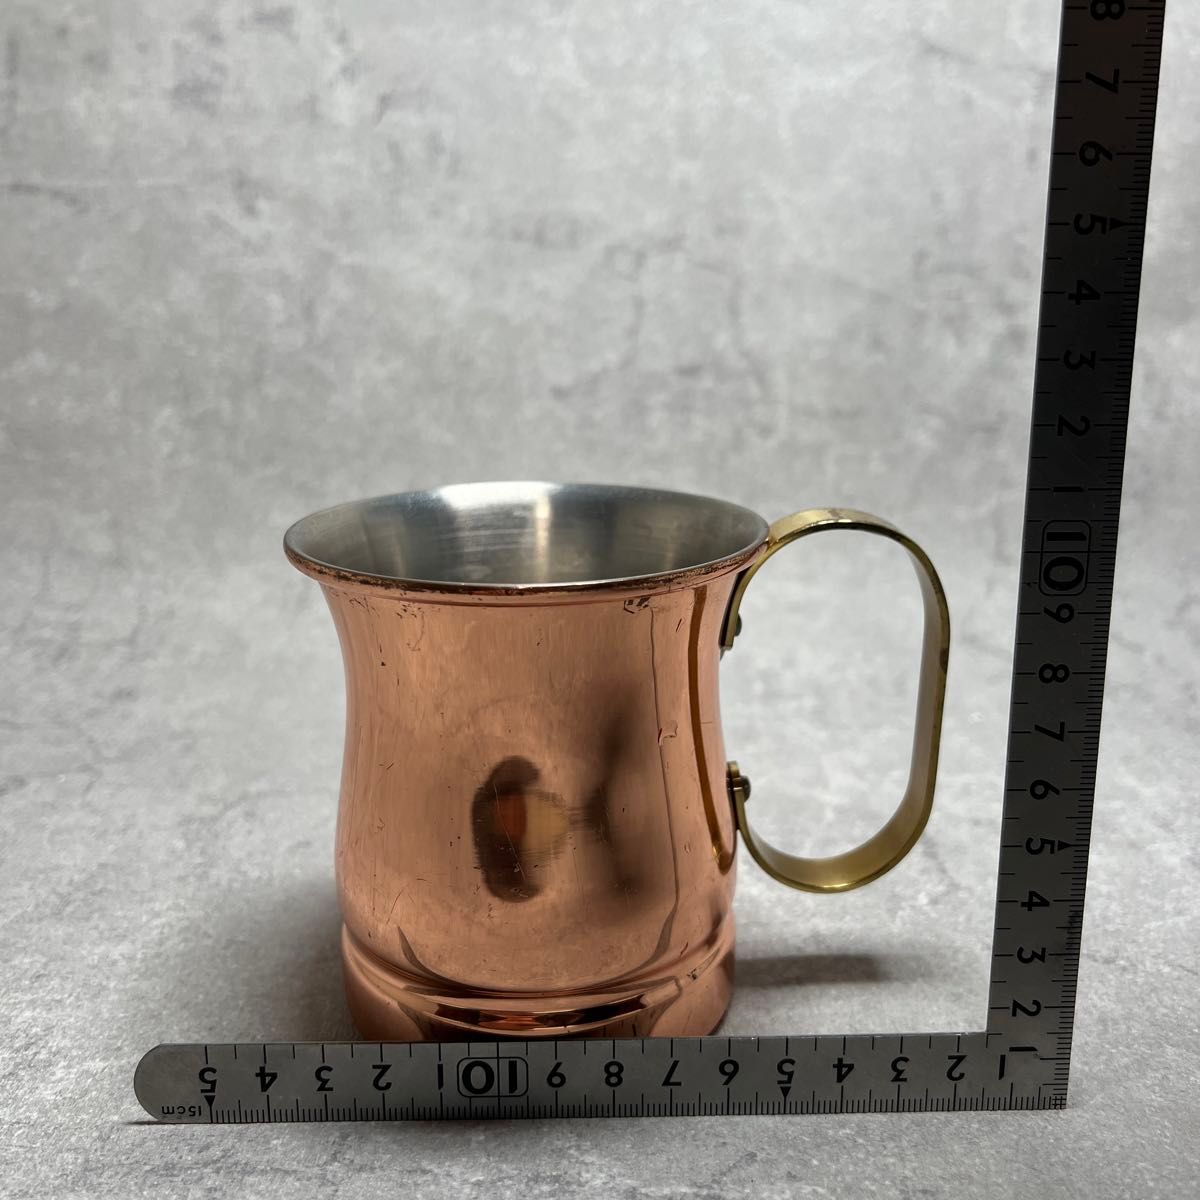 COPPER100 HOME WARE コッパーマグ